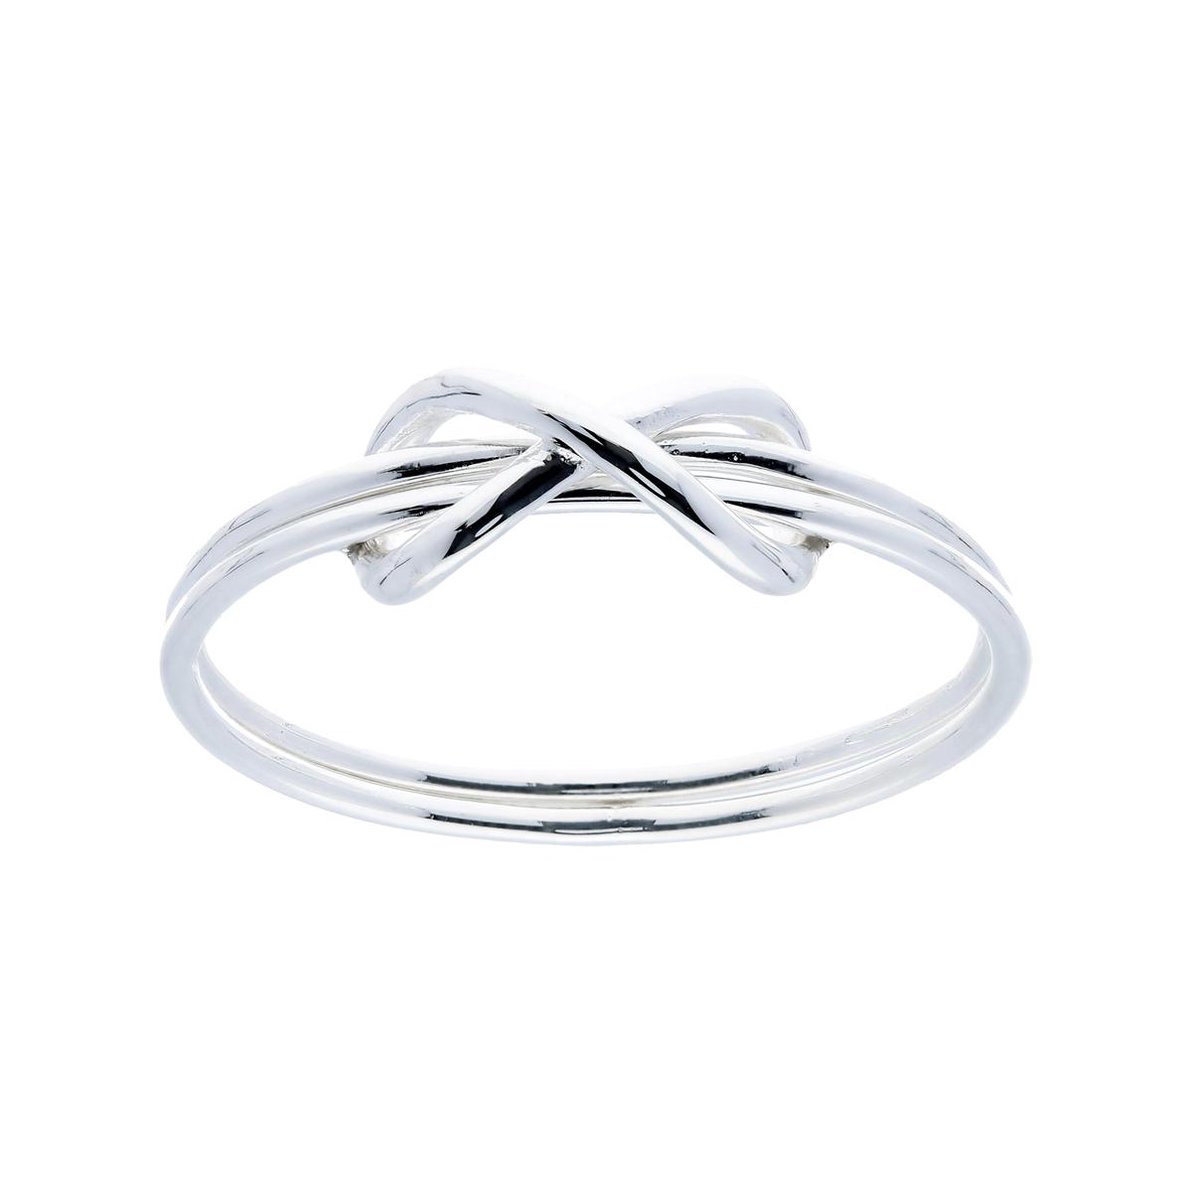 Lovenotes ring - zilver - infinity - dubbele band - maat 50